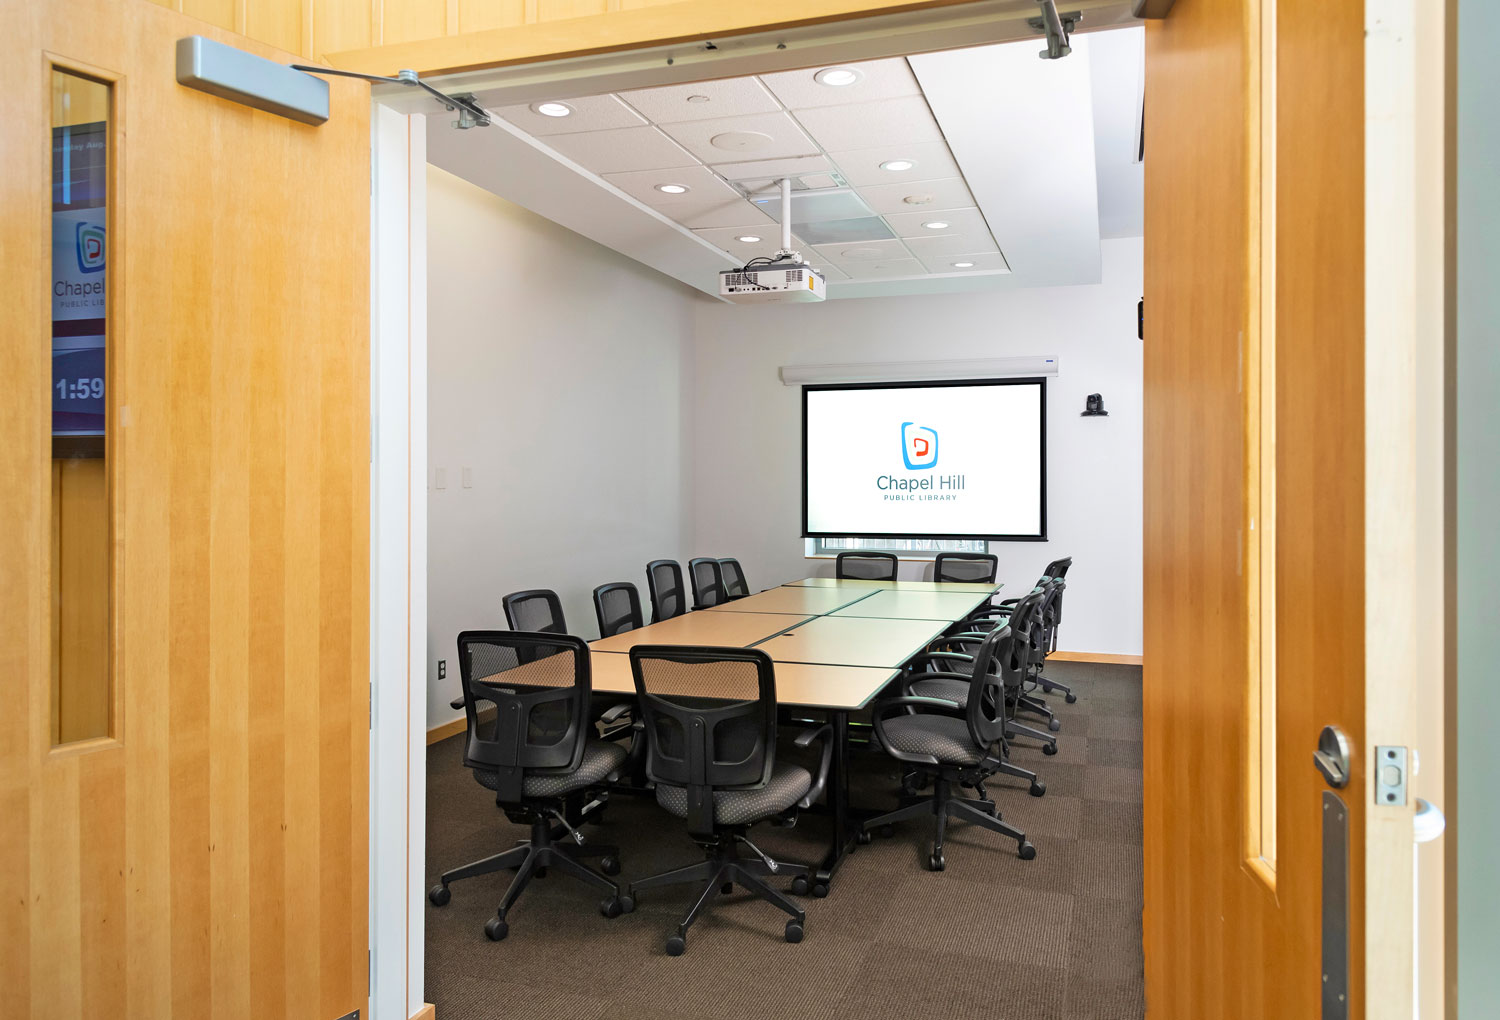 The smaller meetings rooms often host event planning committees and meetings of the board for non-profit organizations.